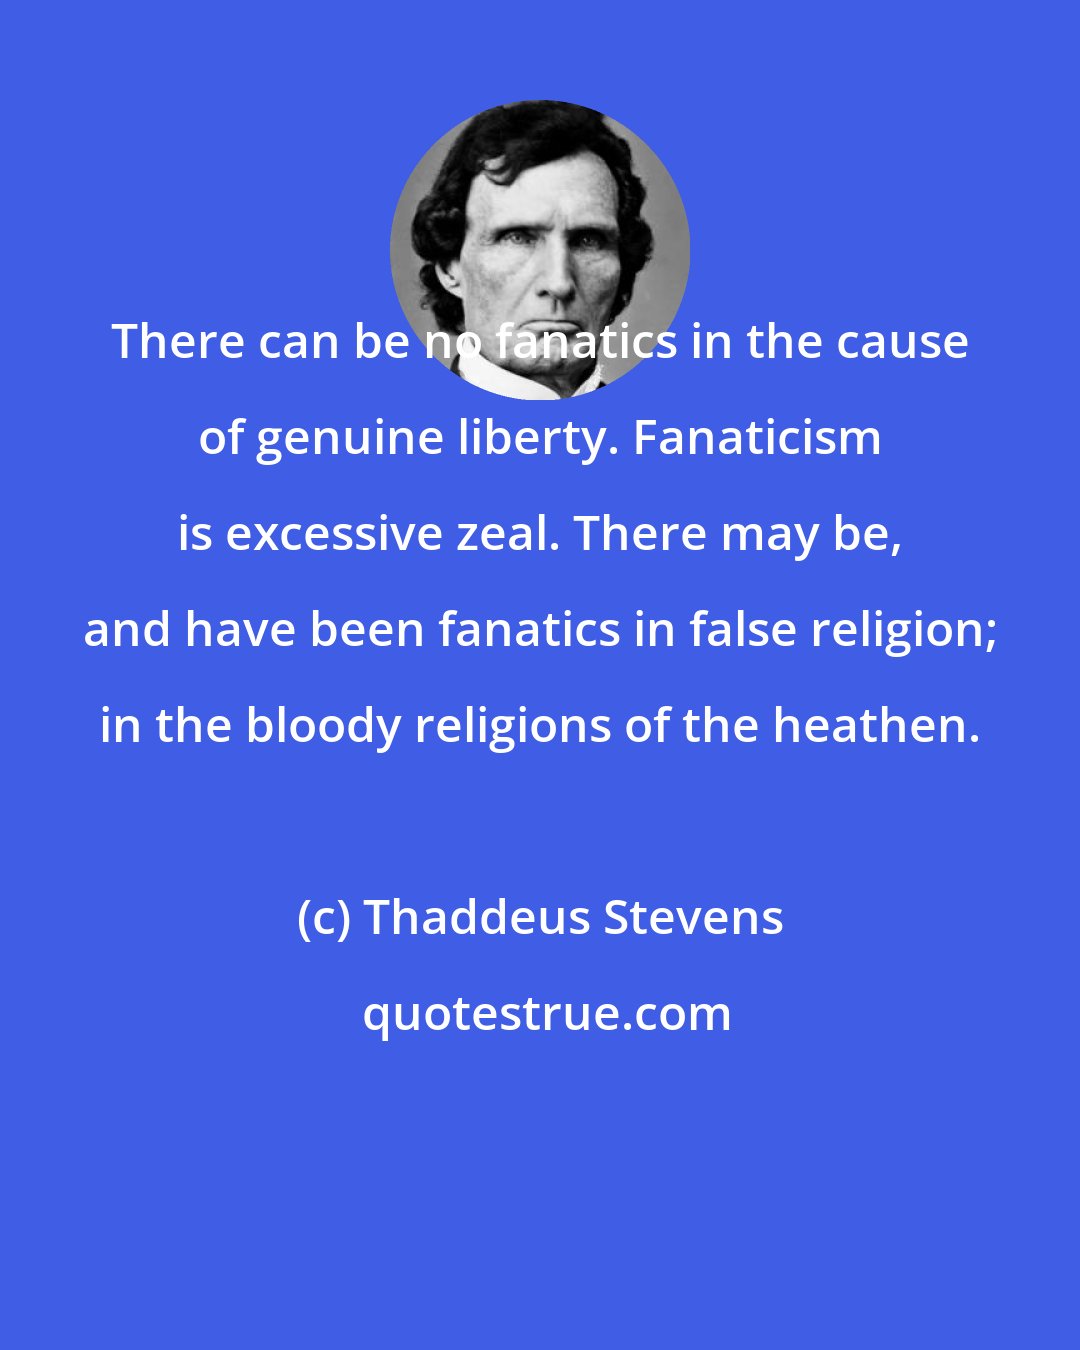 Thaddeus Stevens: There can be no fanatics in the cause of genuine liberty. Fanaticism is excessive zeal. There may be, and have been fanatics in false religion; in the bloody religions of the heathen.